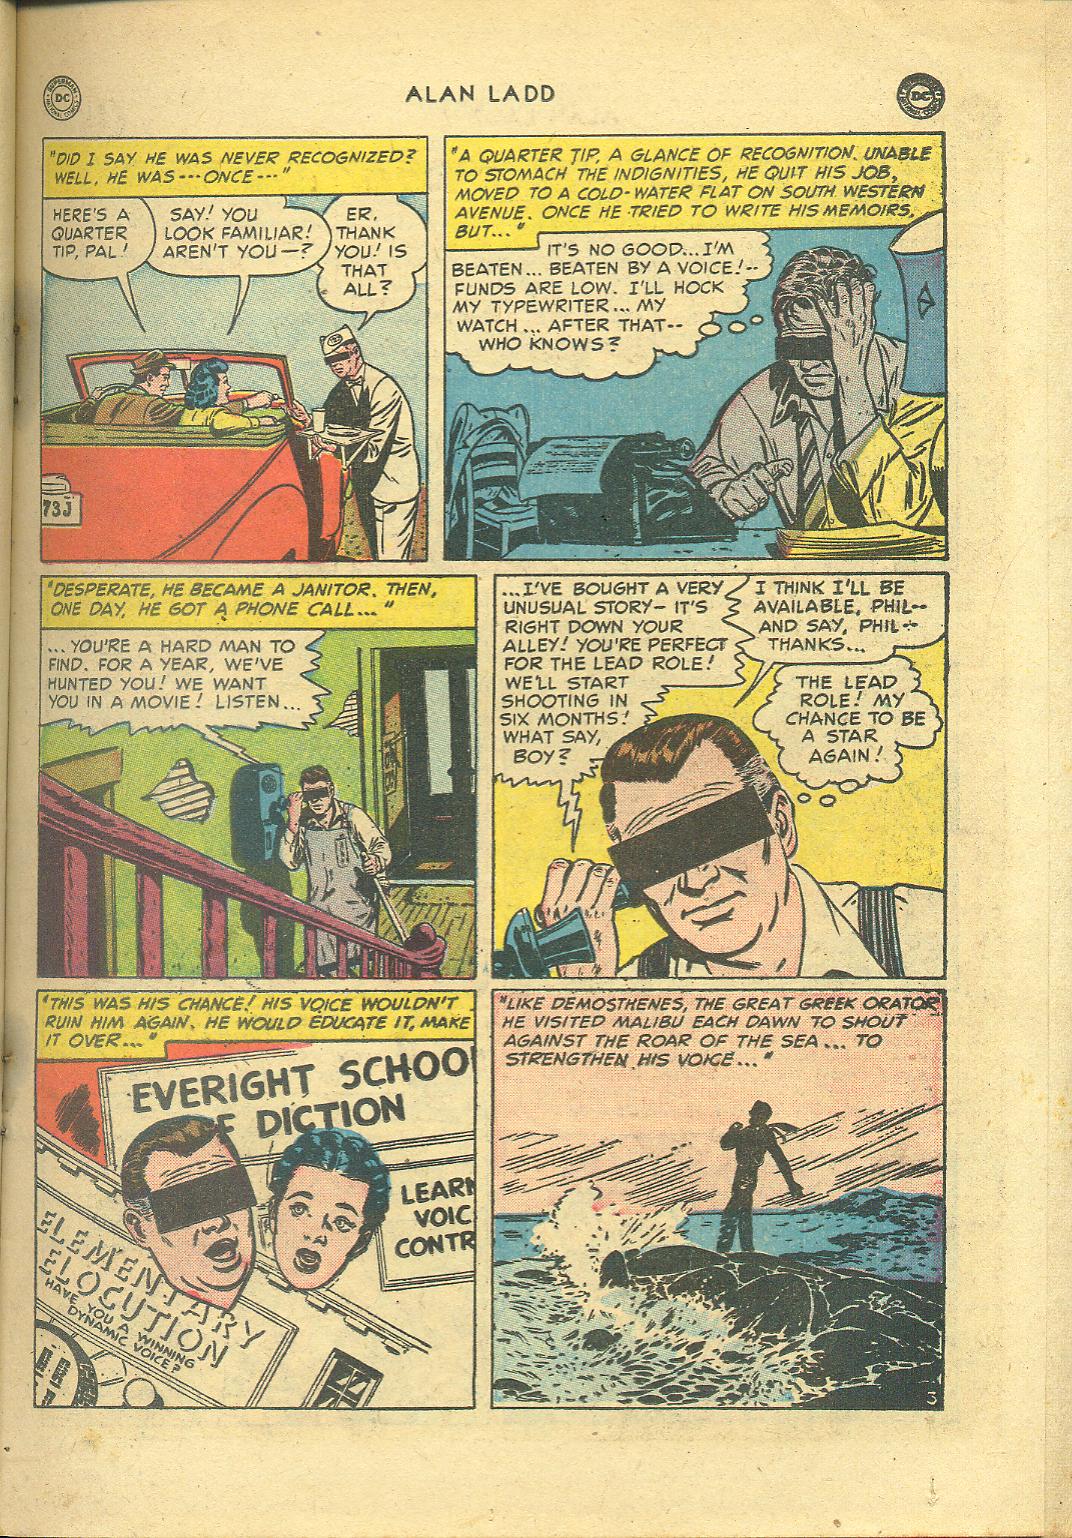 Read online Adventures of Alan Ladd comic -  Issue #2 - 17